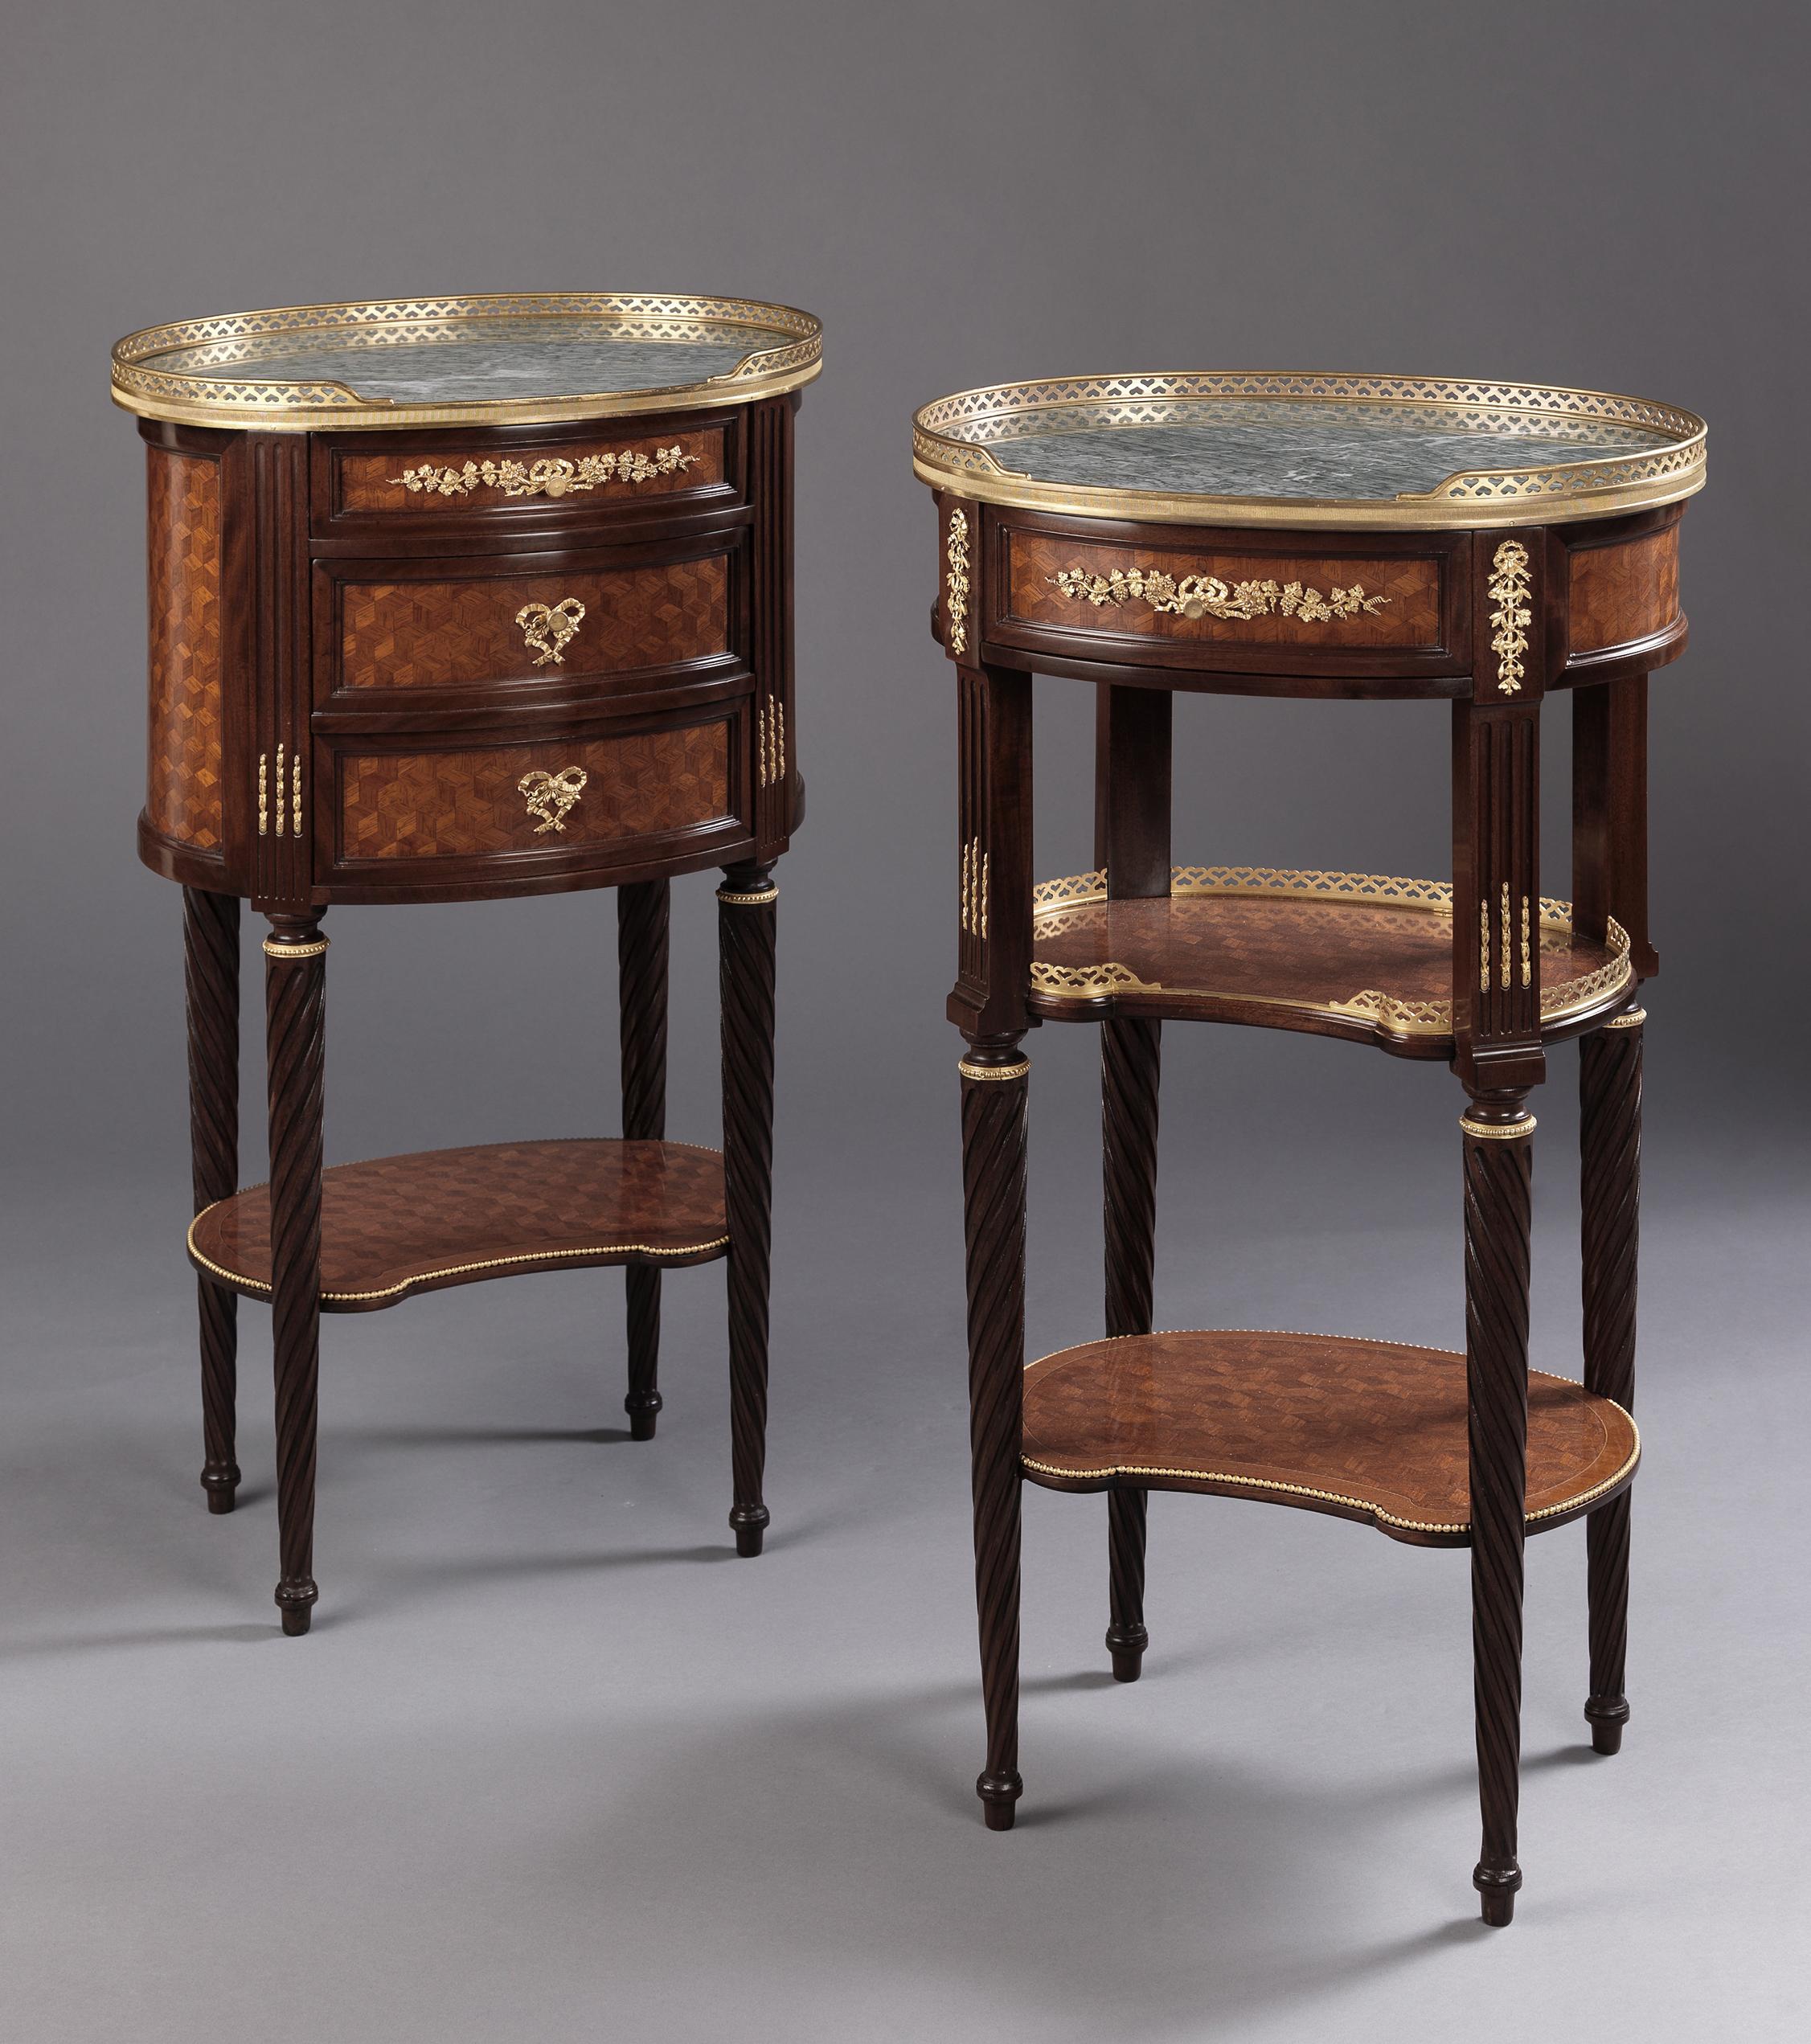 A fine companion pair of Louis XVI style gilt-bronze mounted Mahogany and cube parquetry guéridon or bedside tables with Vert Maurin marble tops.

French, circa 1880. 

Each guéridon is of oval shape with a pierced gilt-bronze gallery and a Vert